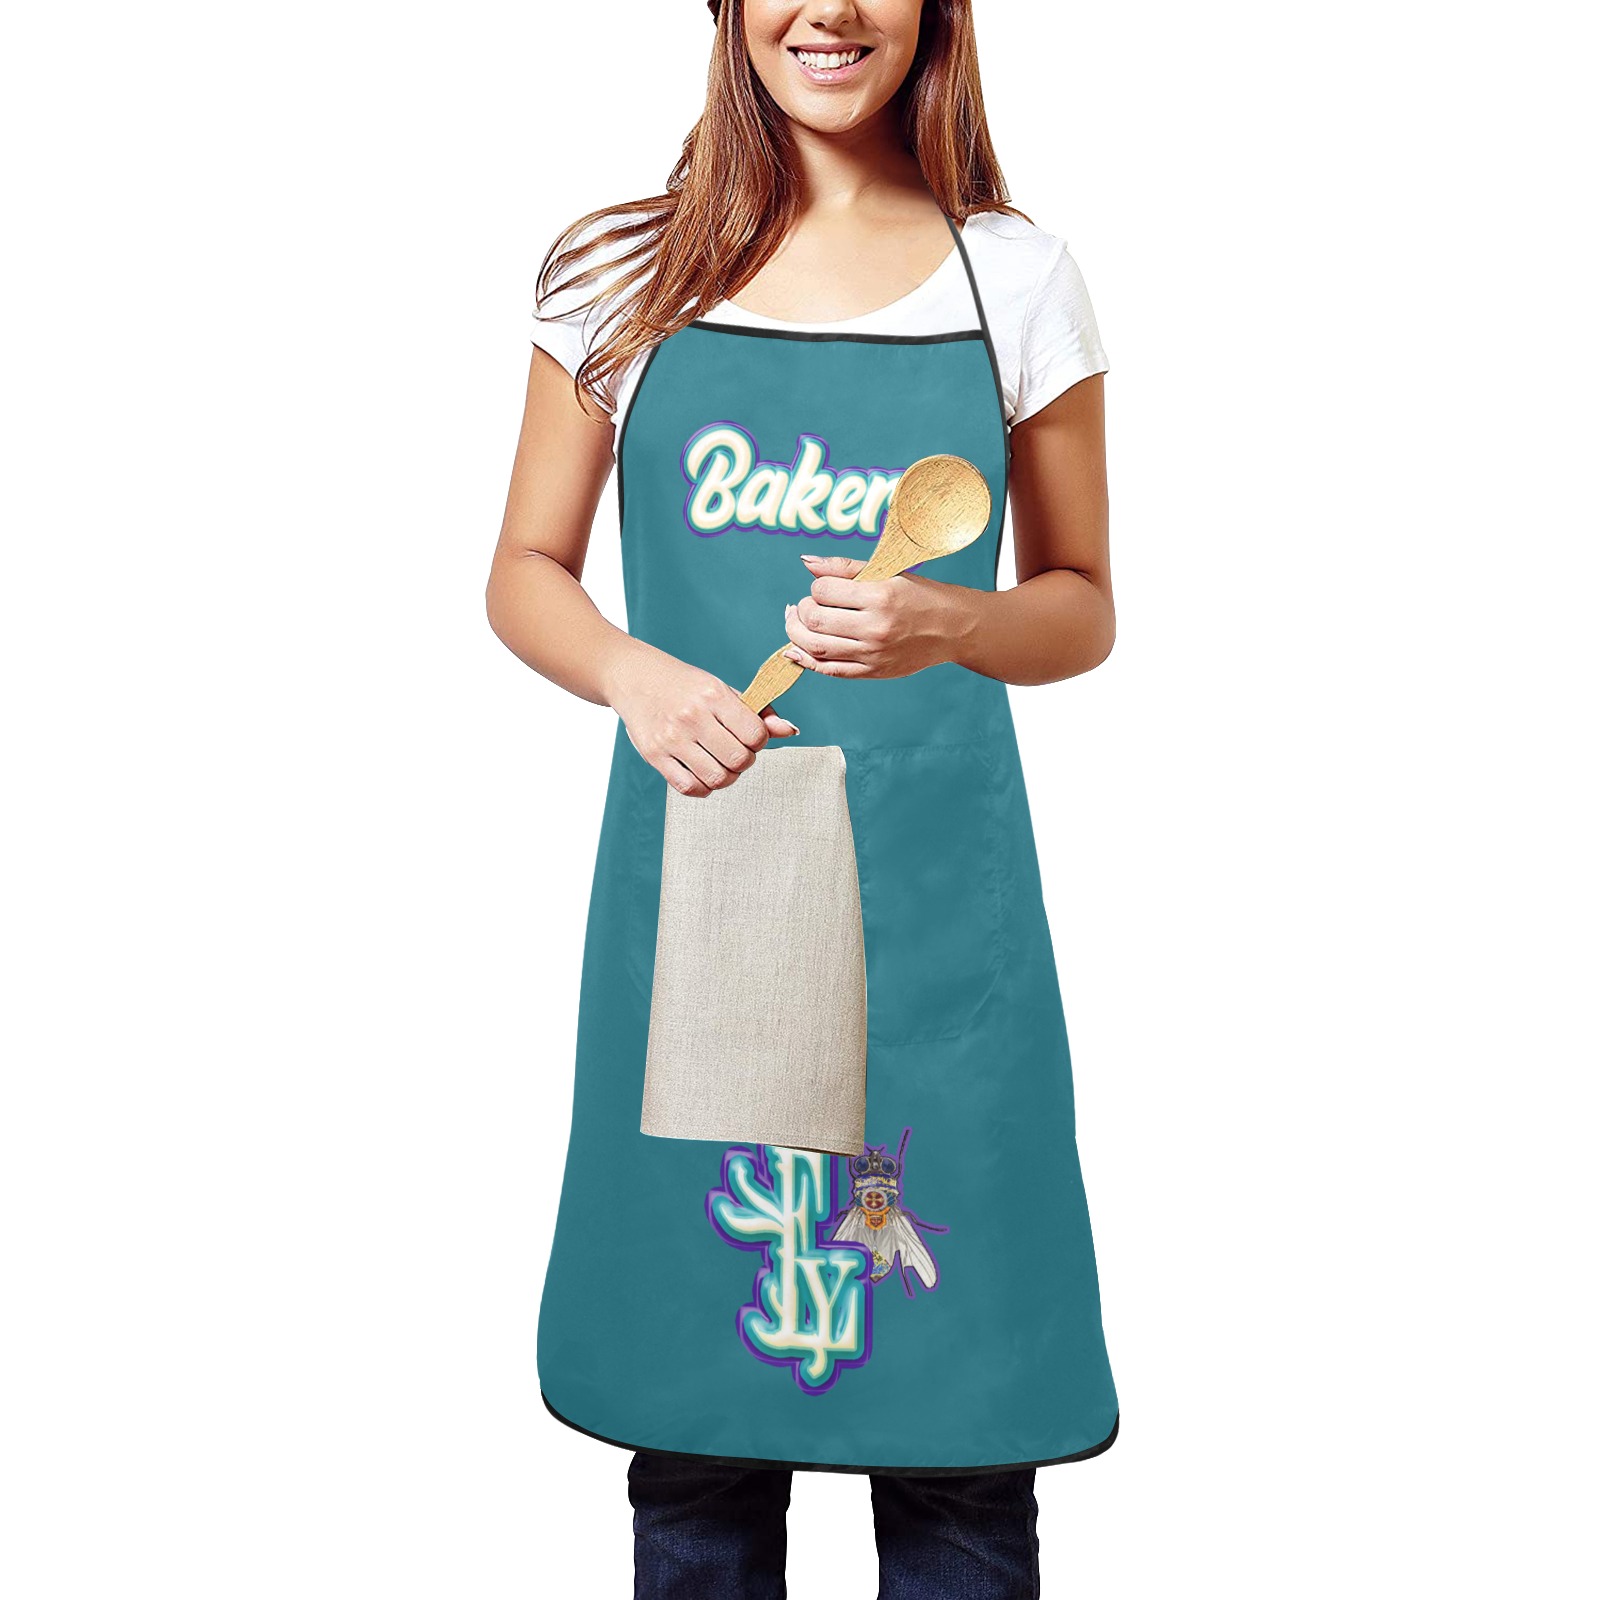 Bakery Collectable Fly Women's Overlock Apron with Pocket